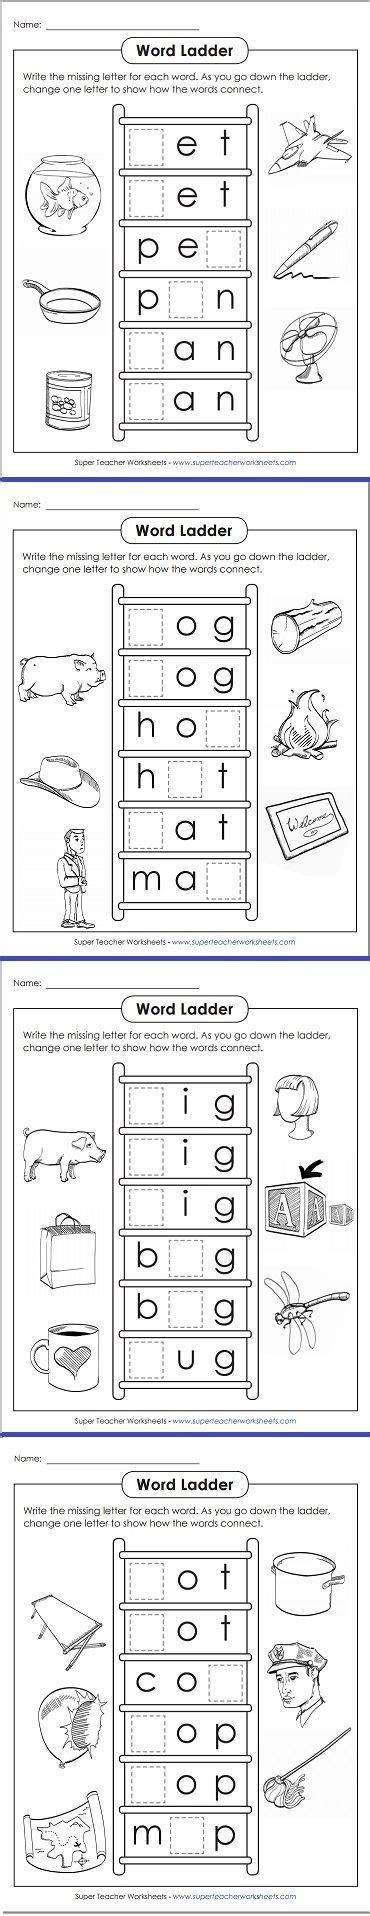 36+ outline templates and formats for ms word. Take a look at these fun word ladders for phonics practice! | Phonics - Super Teacher Worksheets ...